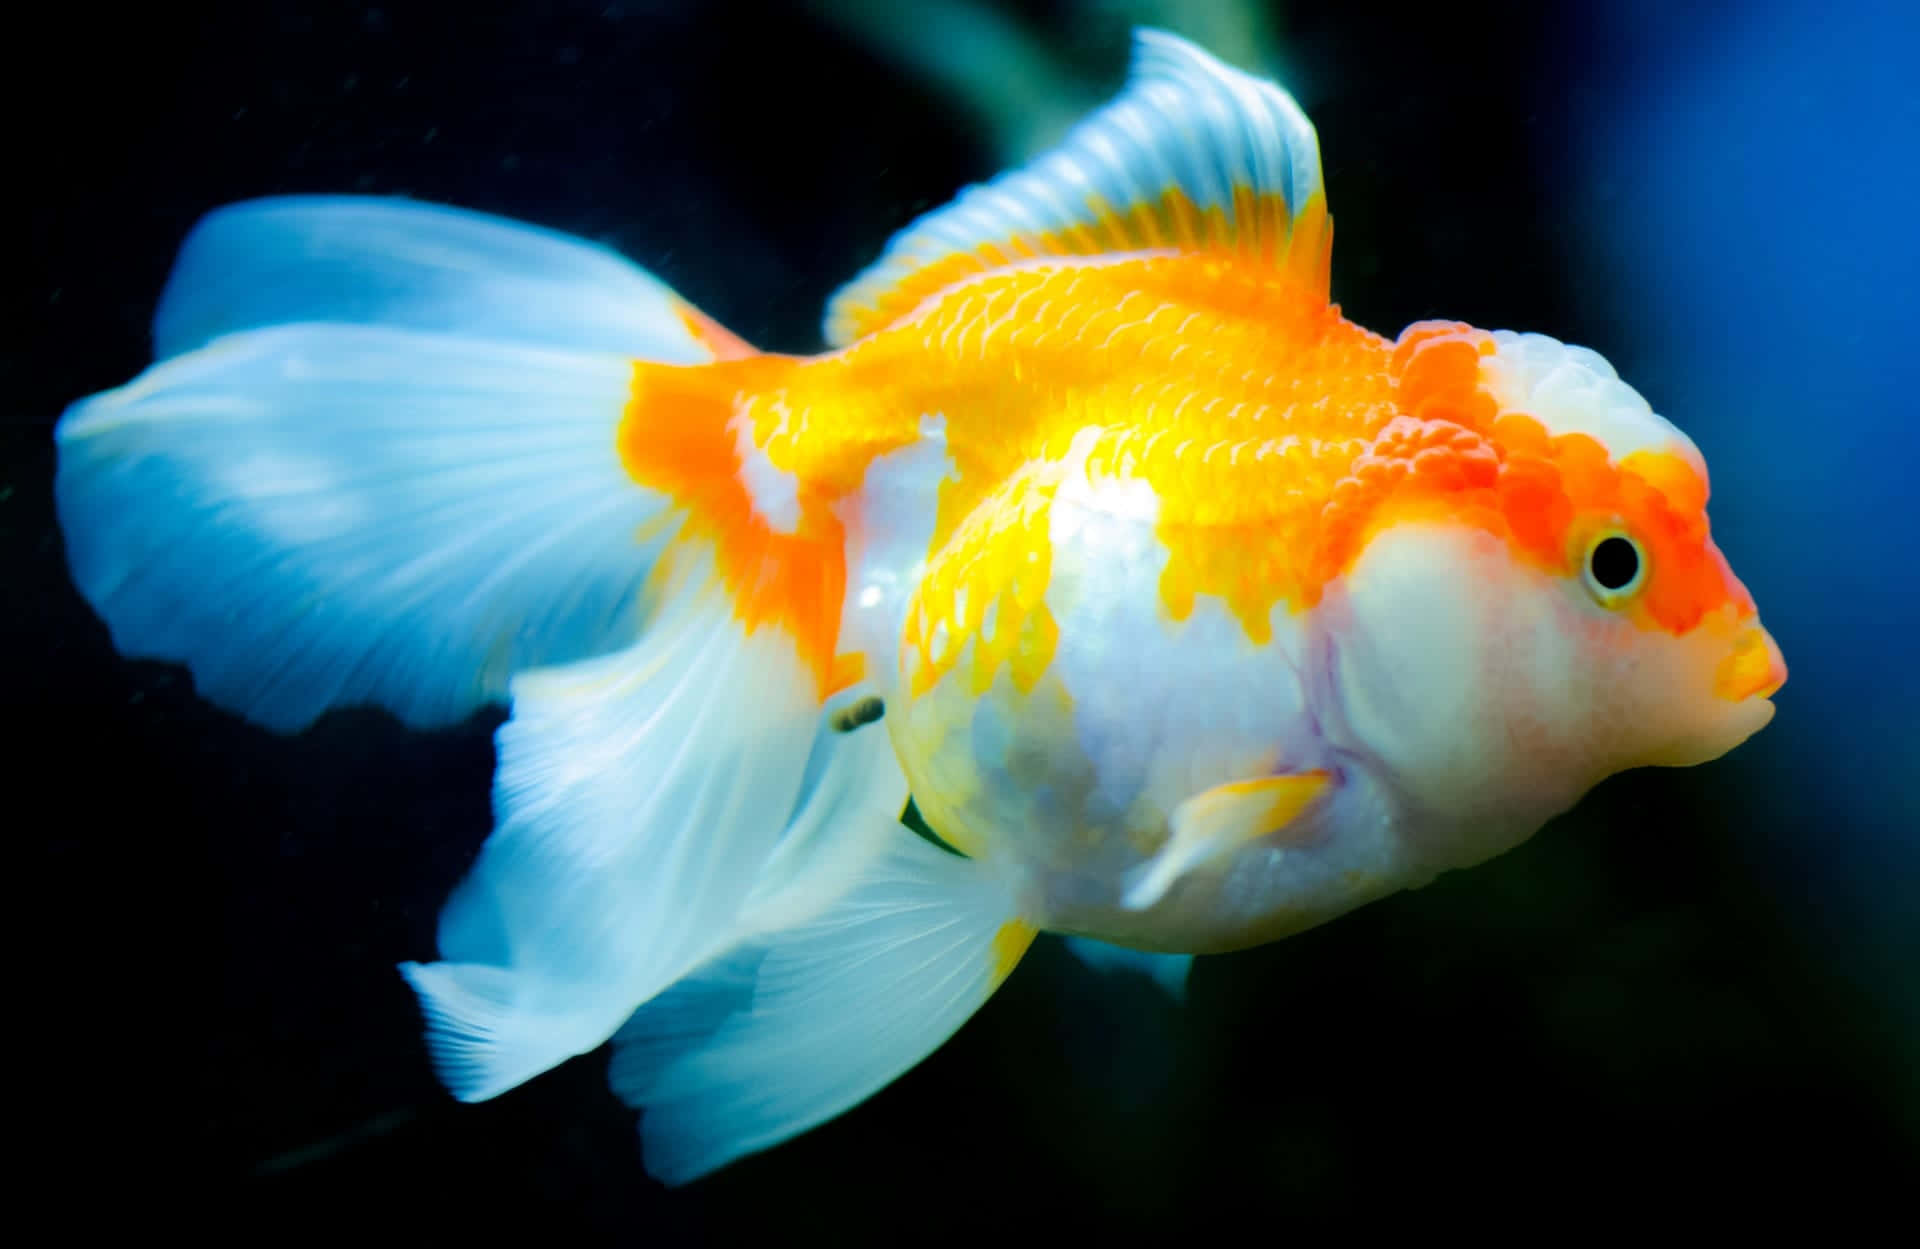 A brightly colored fish swims amidst a stream of blue water